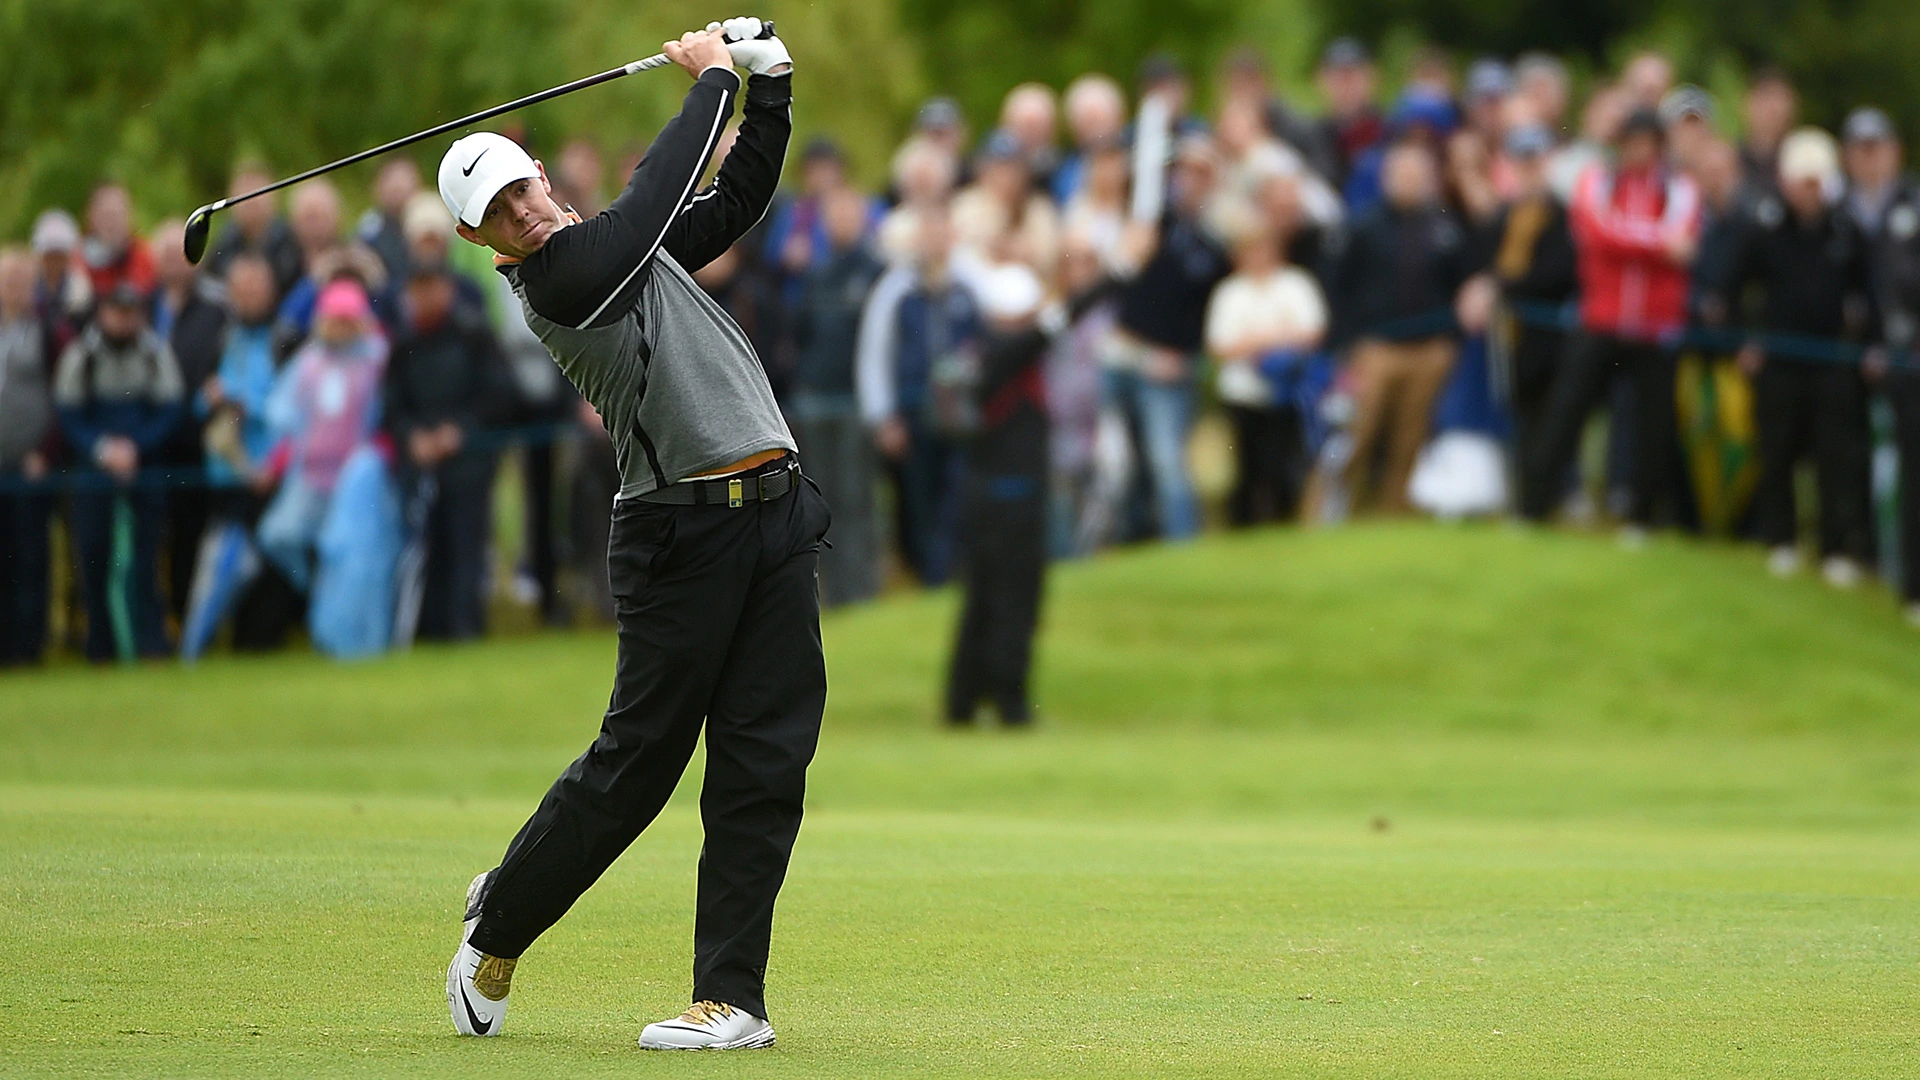 McIlroy skipping Irish Open to prepare for The Open at Royal Portrush